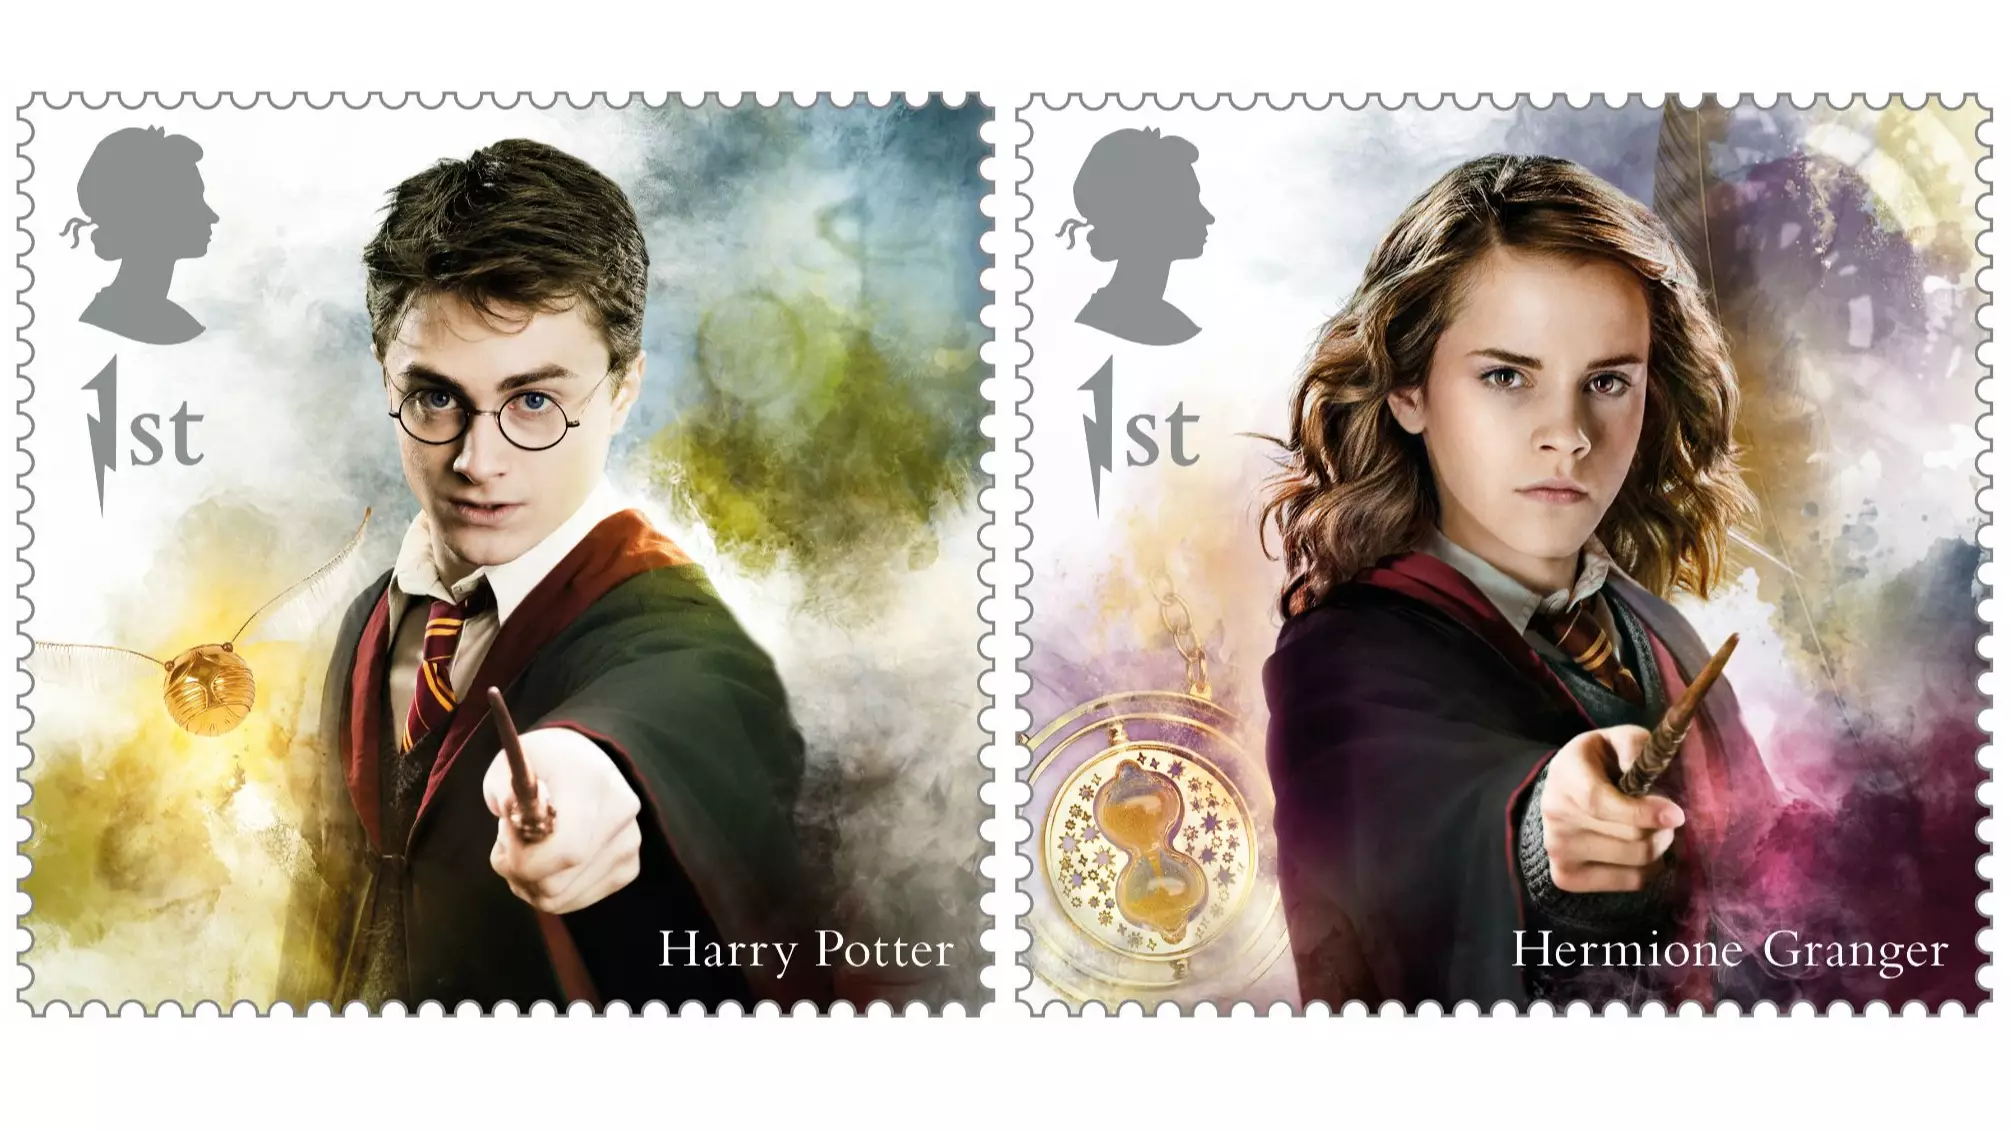 Royal Mail Is Adding Magic To Its Mail With Limited Edition Harry Potter Stamps